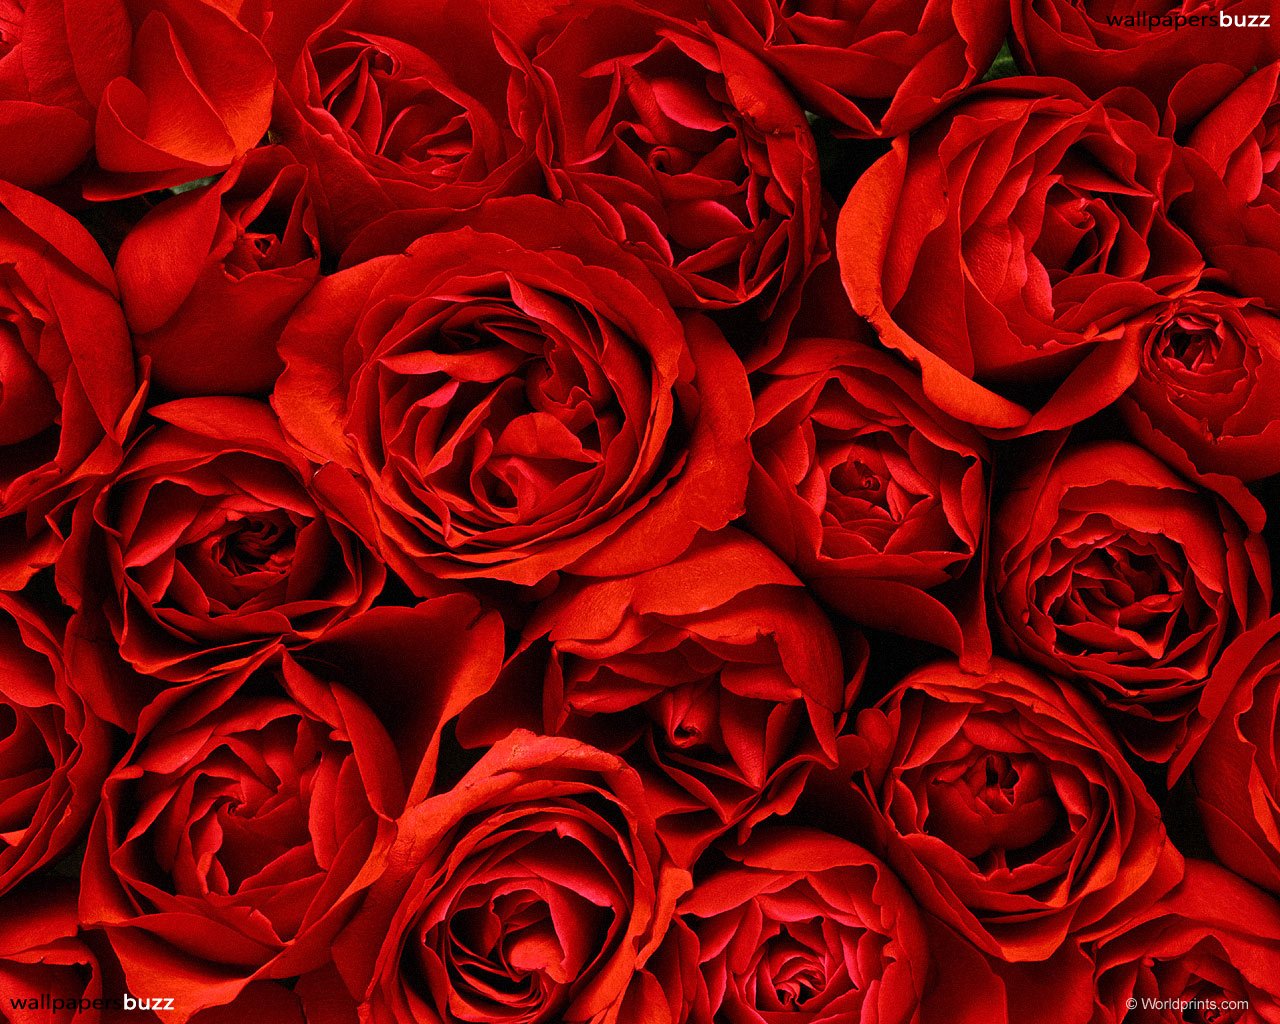 red roses most popular rose rose wallpapers beautiful rose red 1280x1024